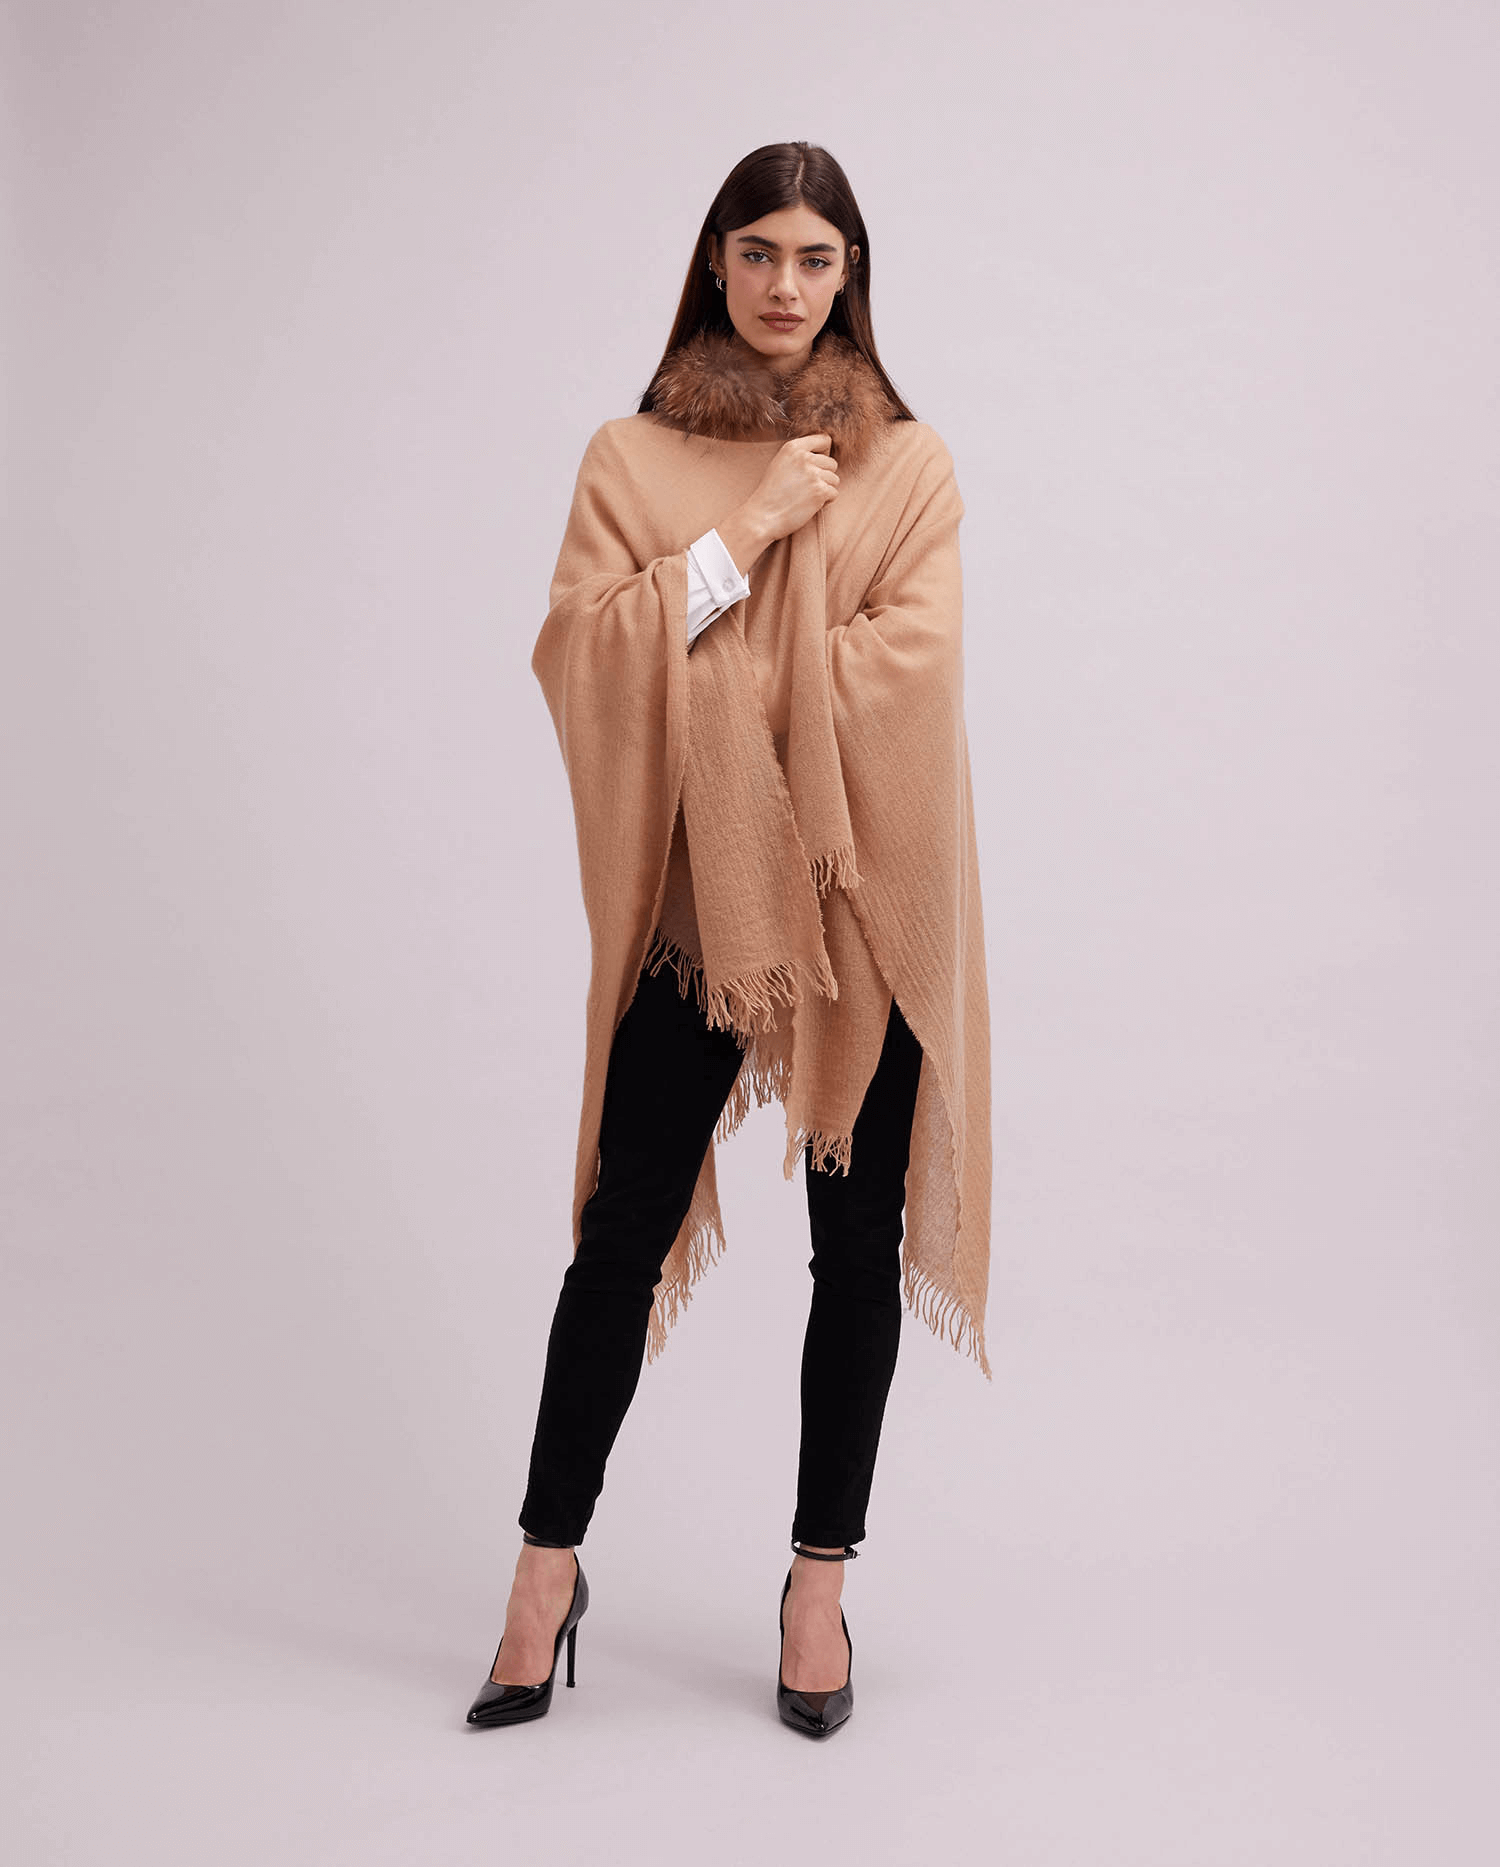 Discover the GUS poncho from ANNE FONTAINE for effortless elegance.